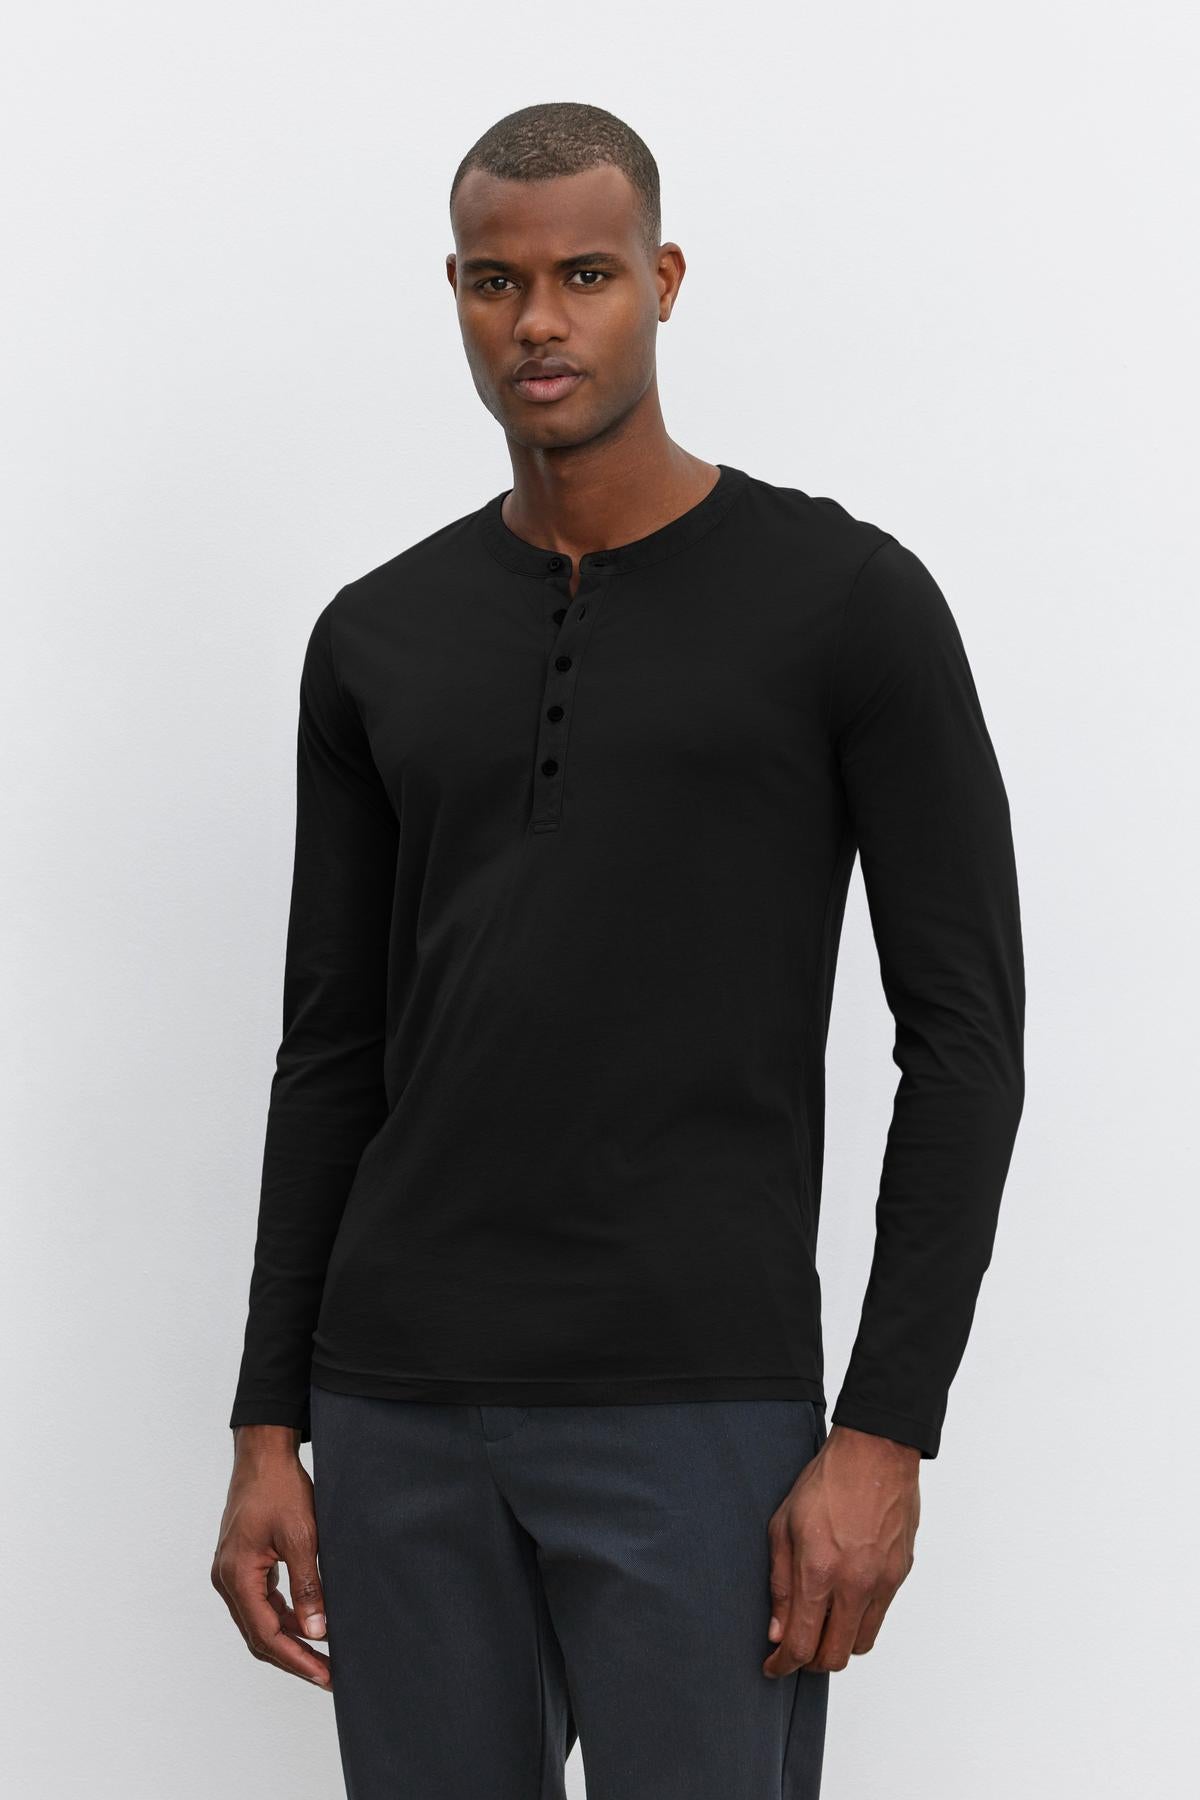 A person is standing against a plain background, wearing a black long-sleeve lightweight ALVARO HENLEY by Velvet by Graham & Spencer and dark jeans.-36273890492609